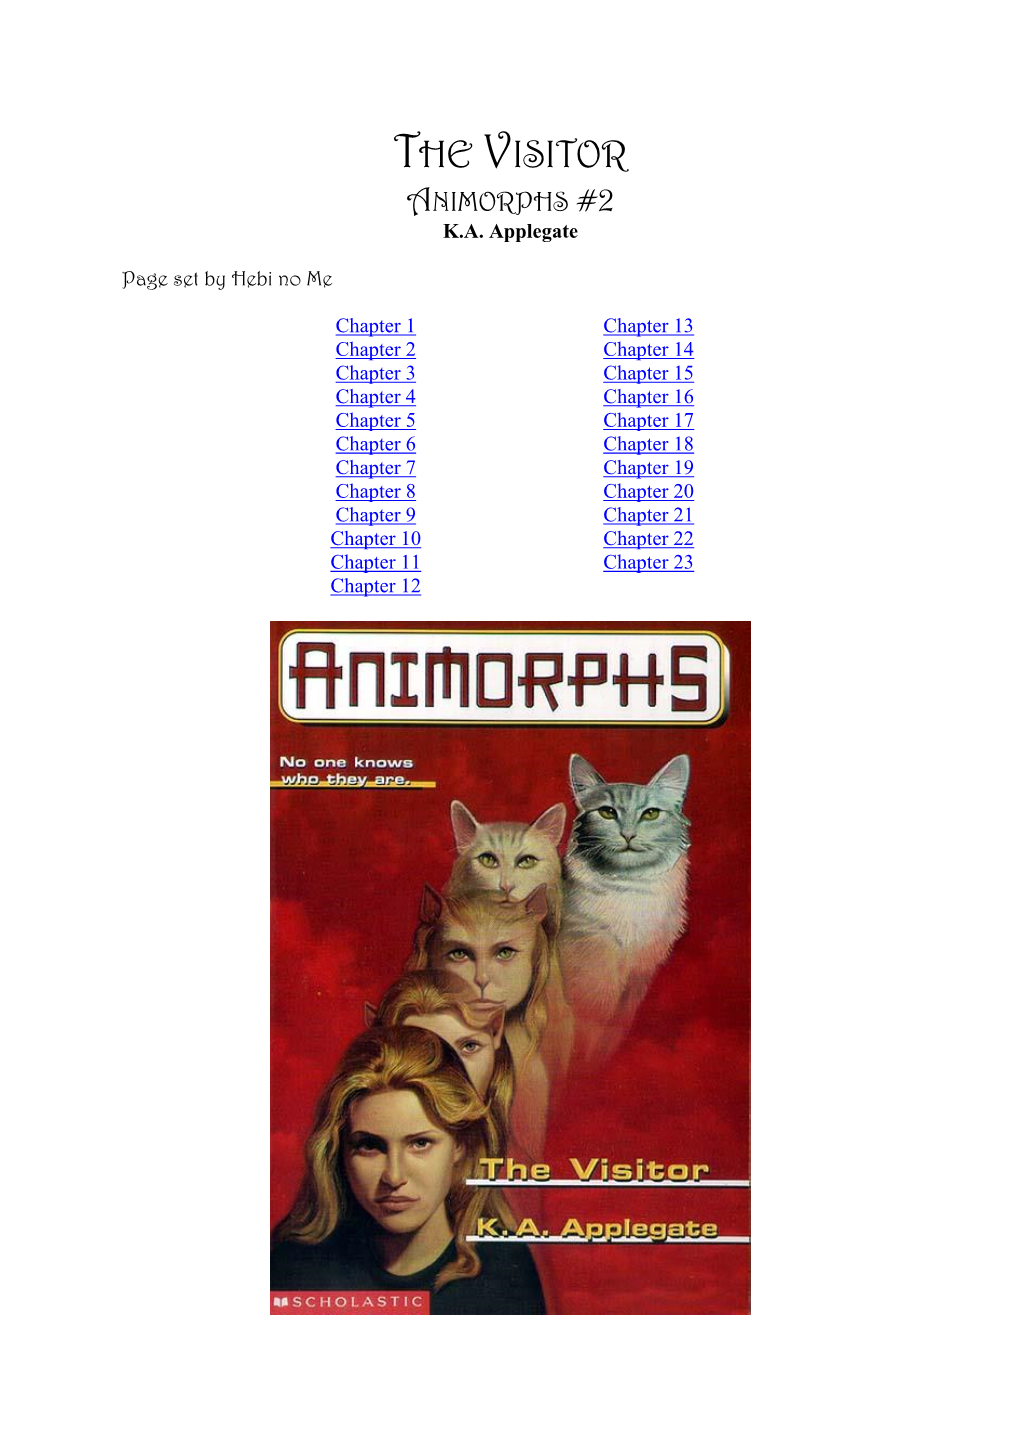 The Visitor Animorphs #2 K.A